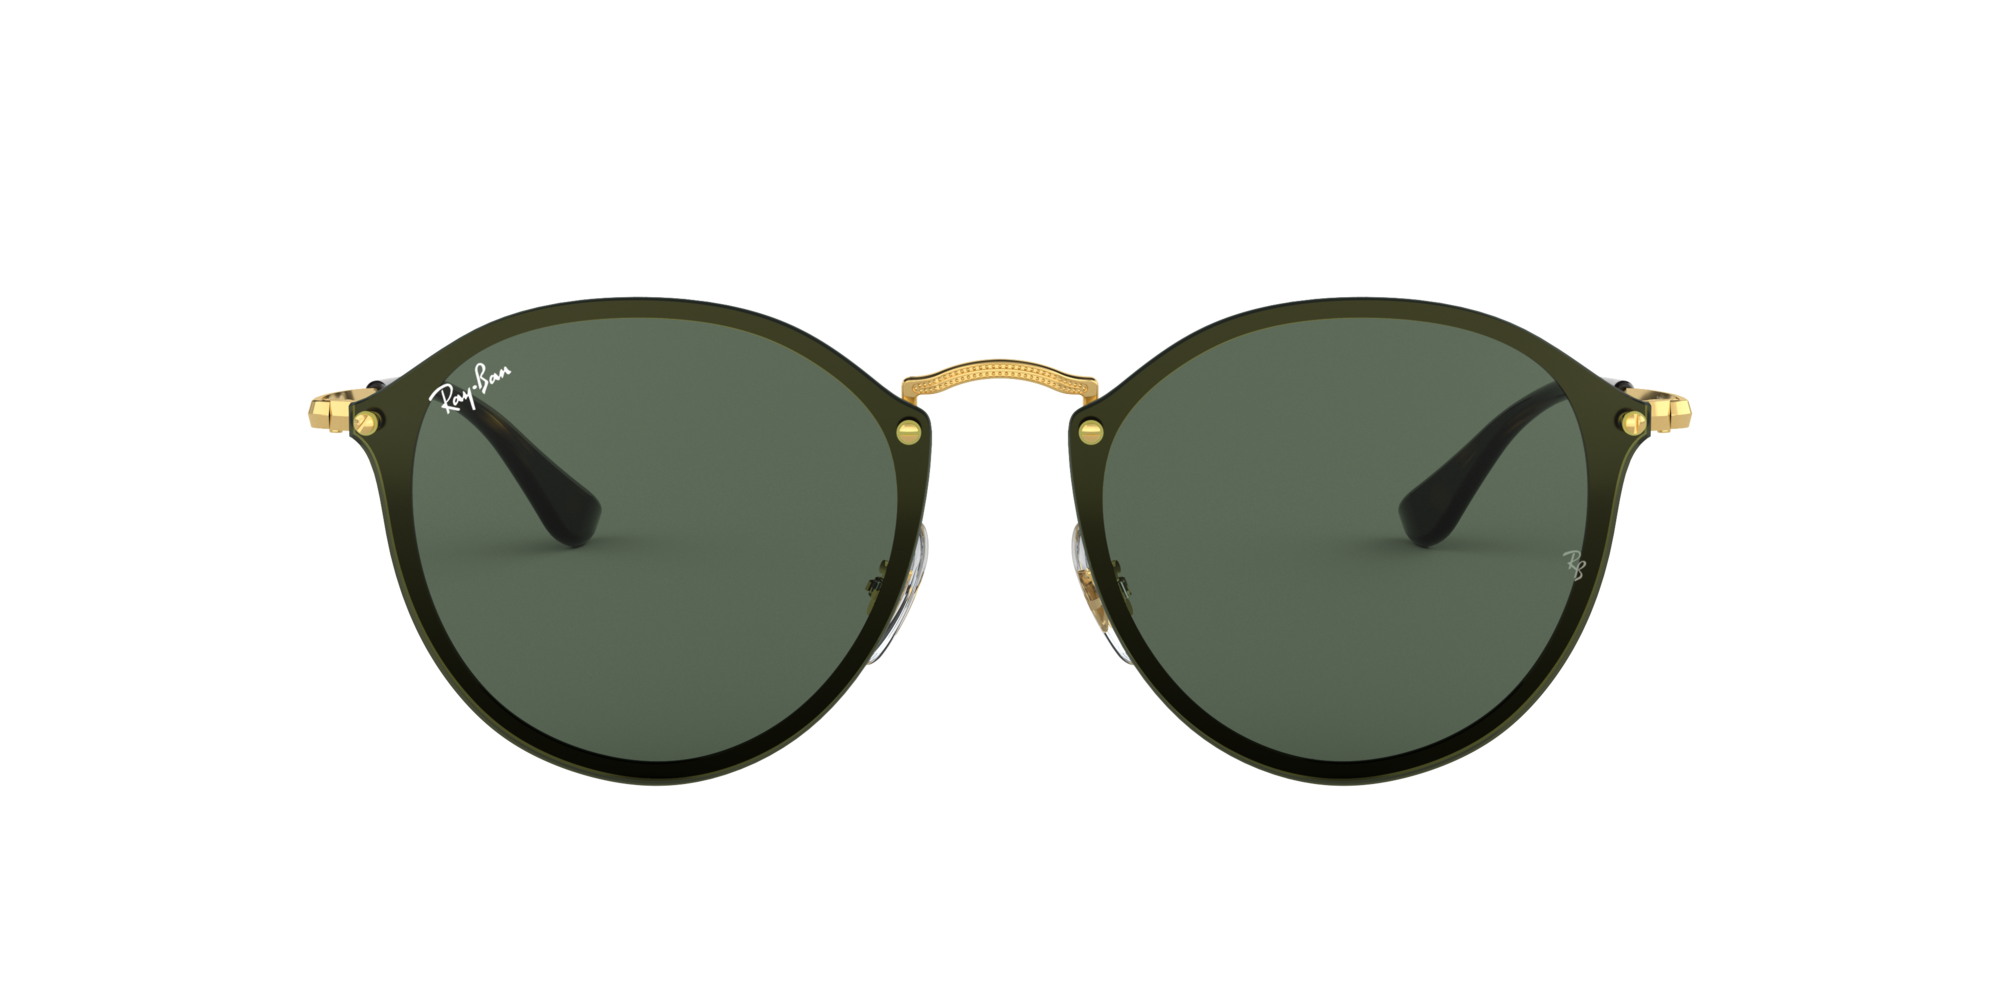 Ray-Ban 0RB3574N in Gold Sunglasses | OPSM